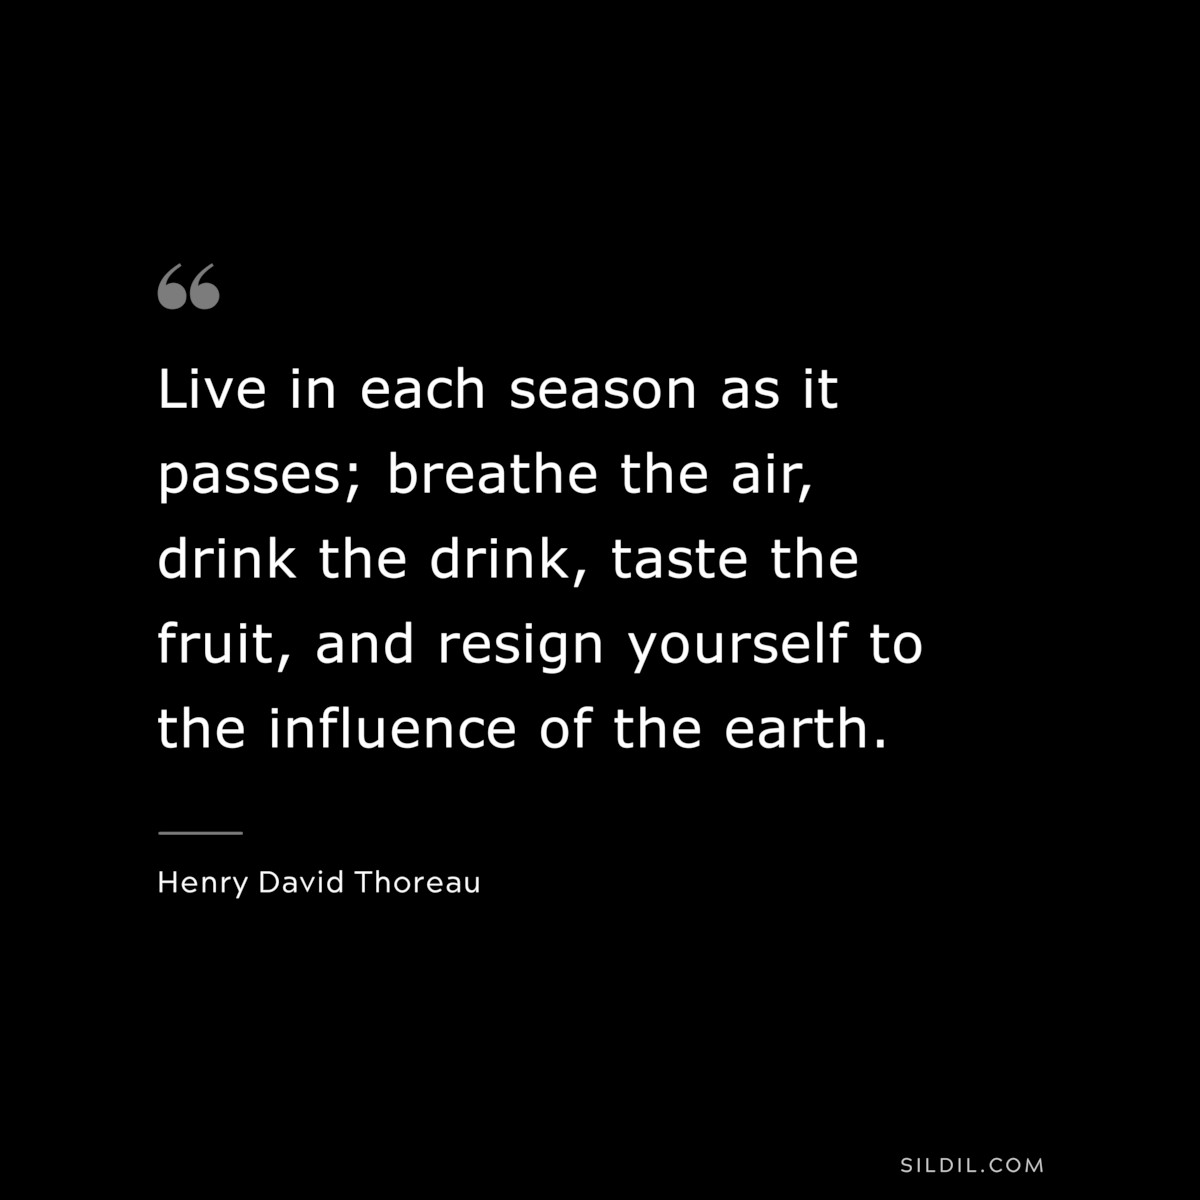 Live in each season as it passes; breathe the air, drink the drink, taste the fruit, and resign yourself to the influence of the earth. — Henry David Thoreau